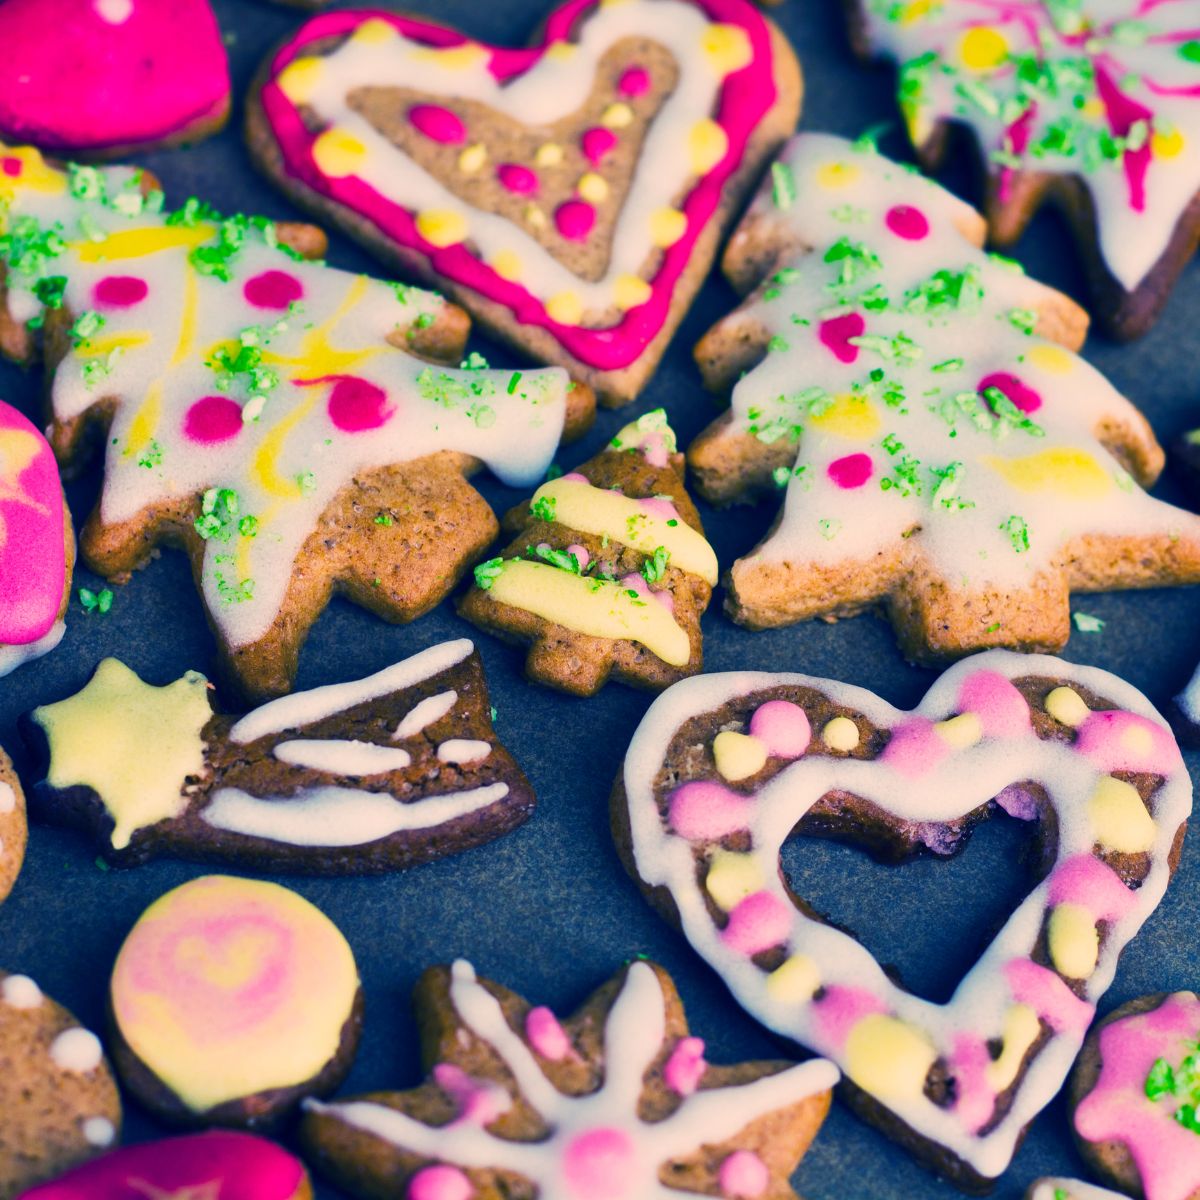 Tree and heart shaped cookies decorated in pastel colors.